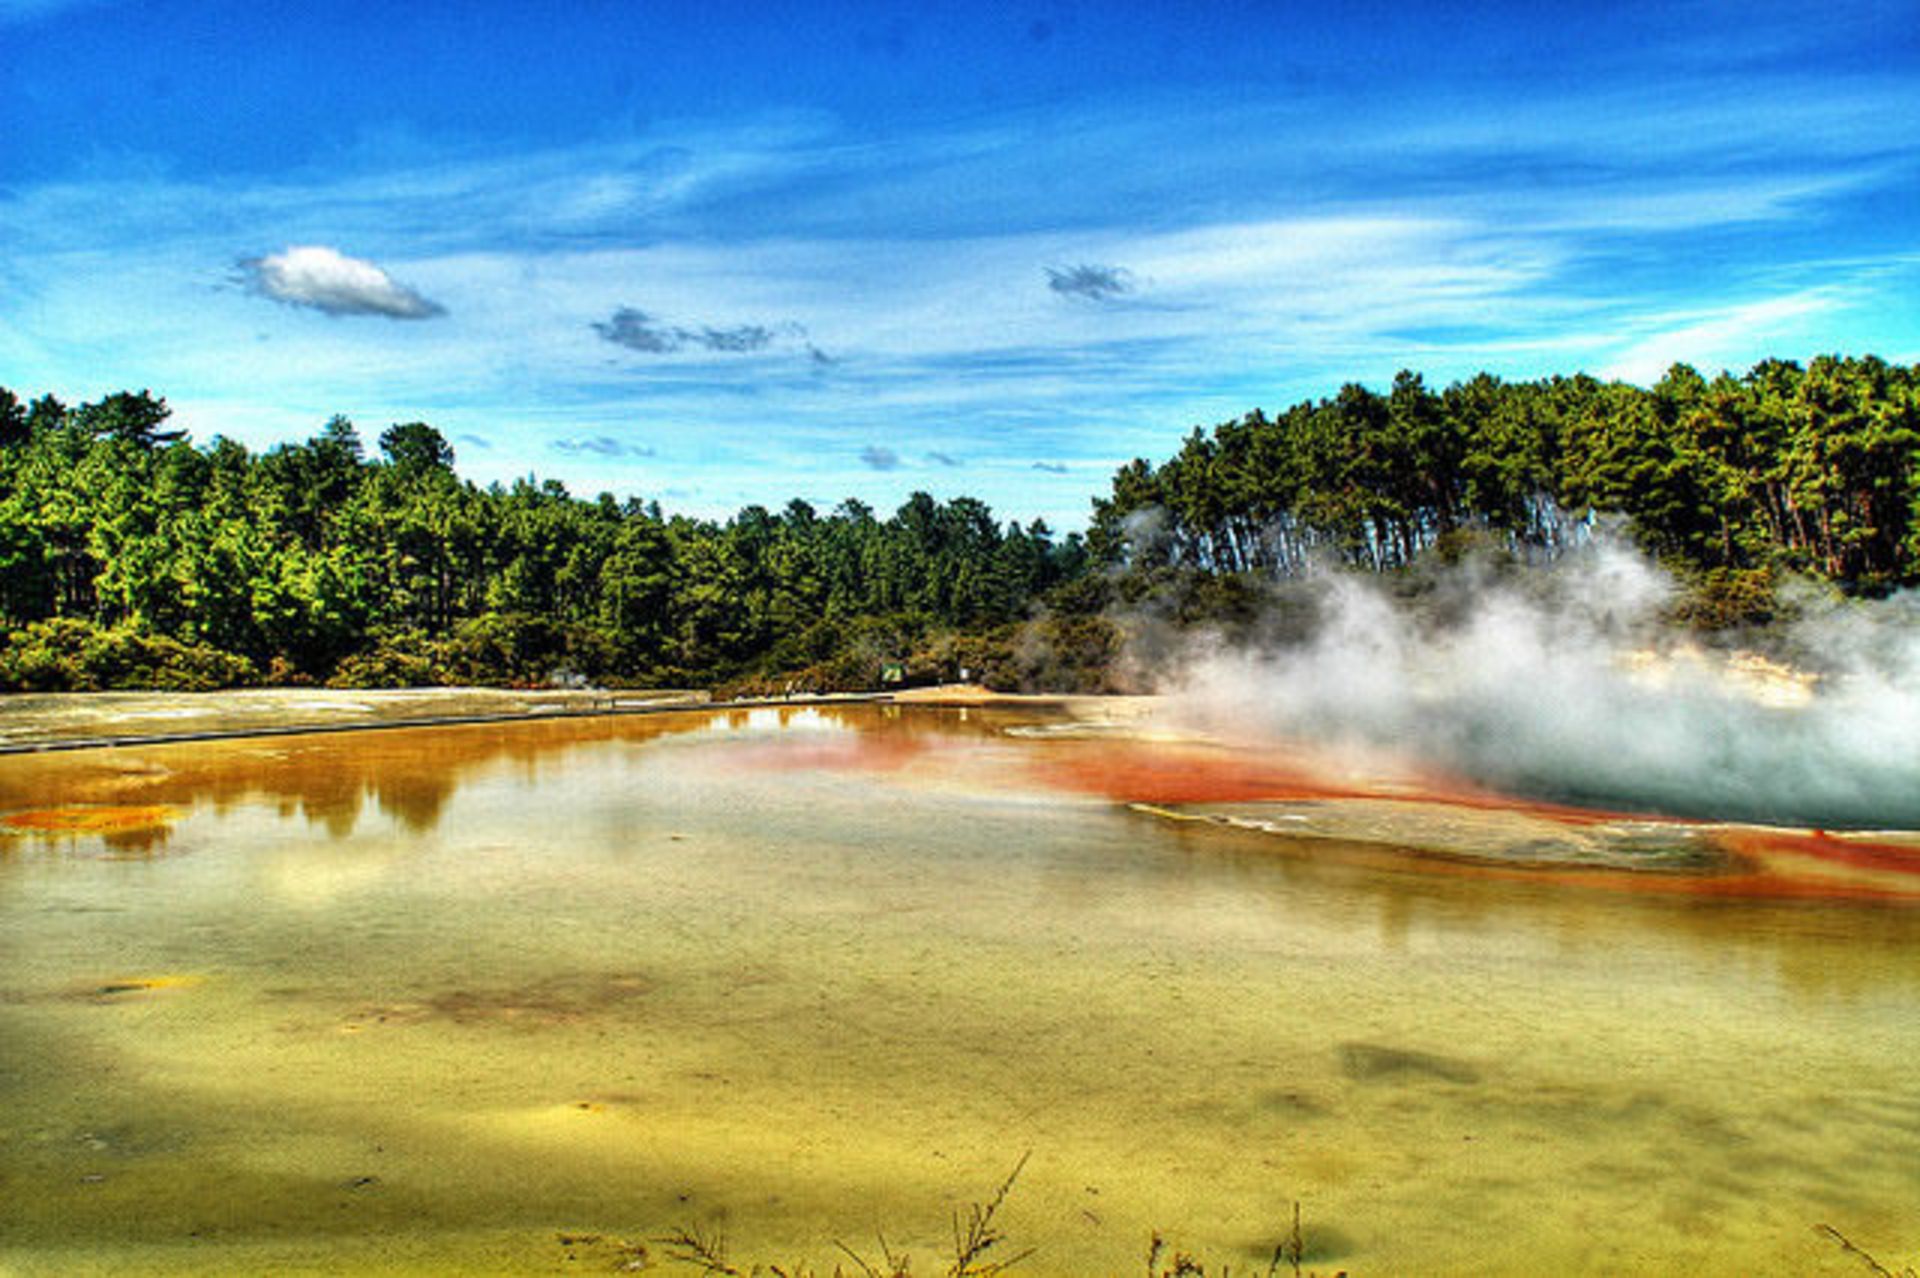 geysers-and-springs-5